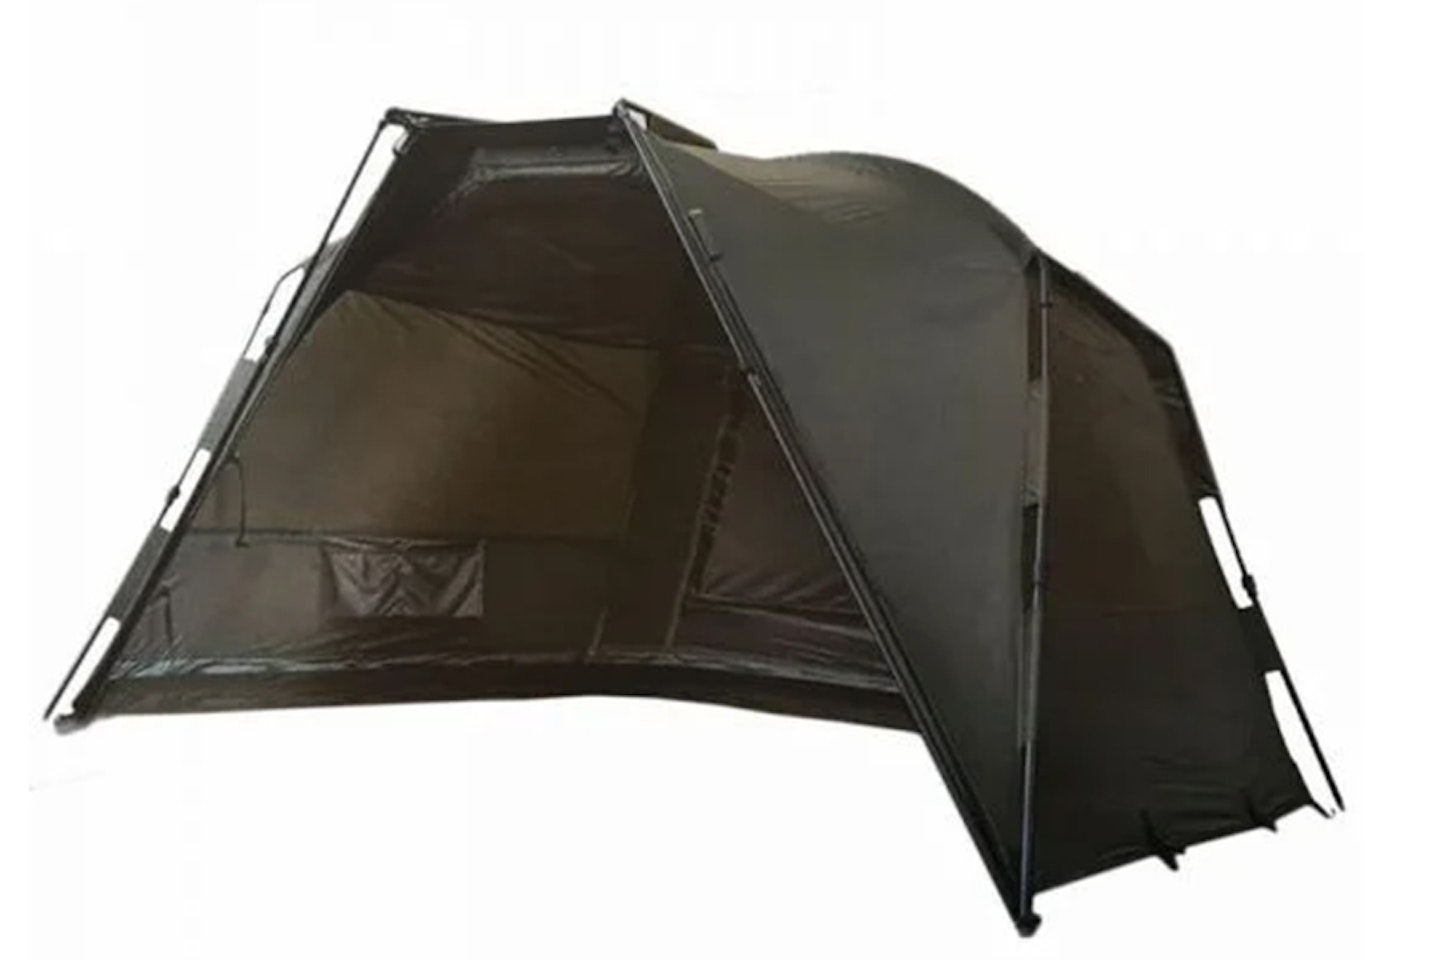 Solar Tackle Compact Spider Shelter 